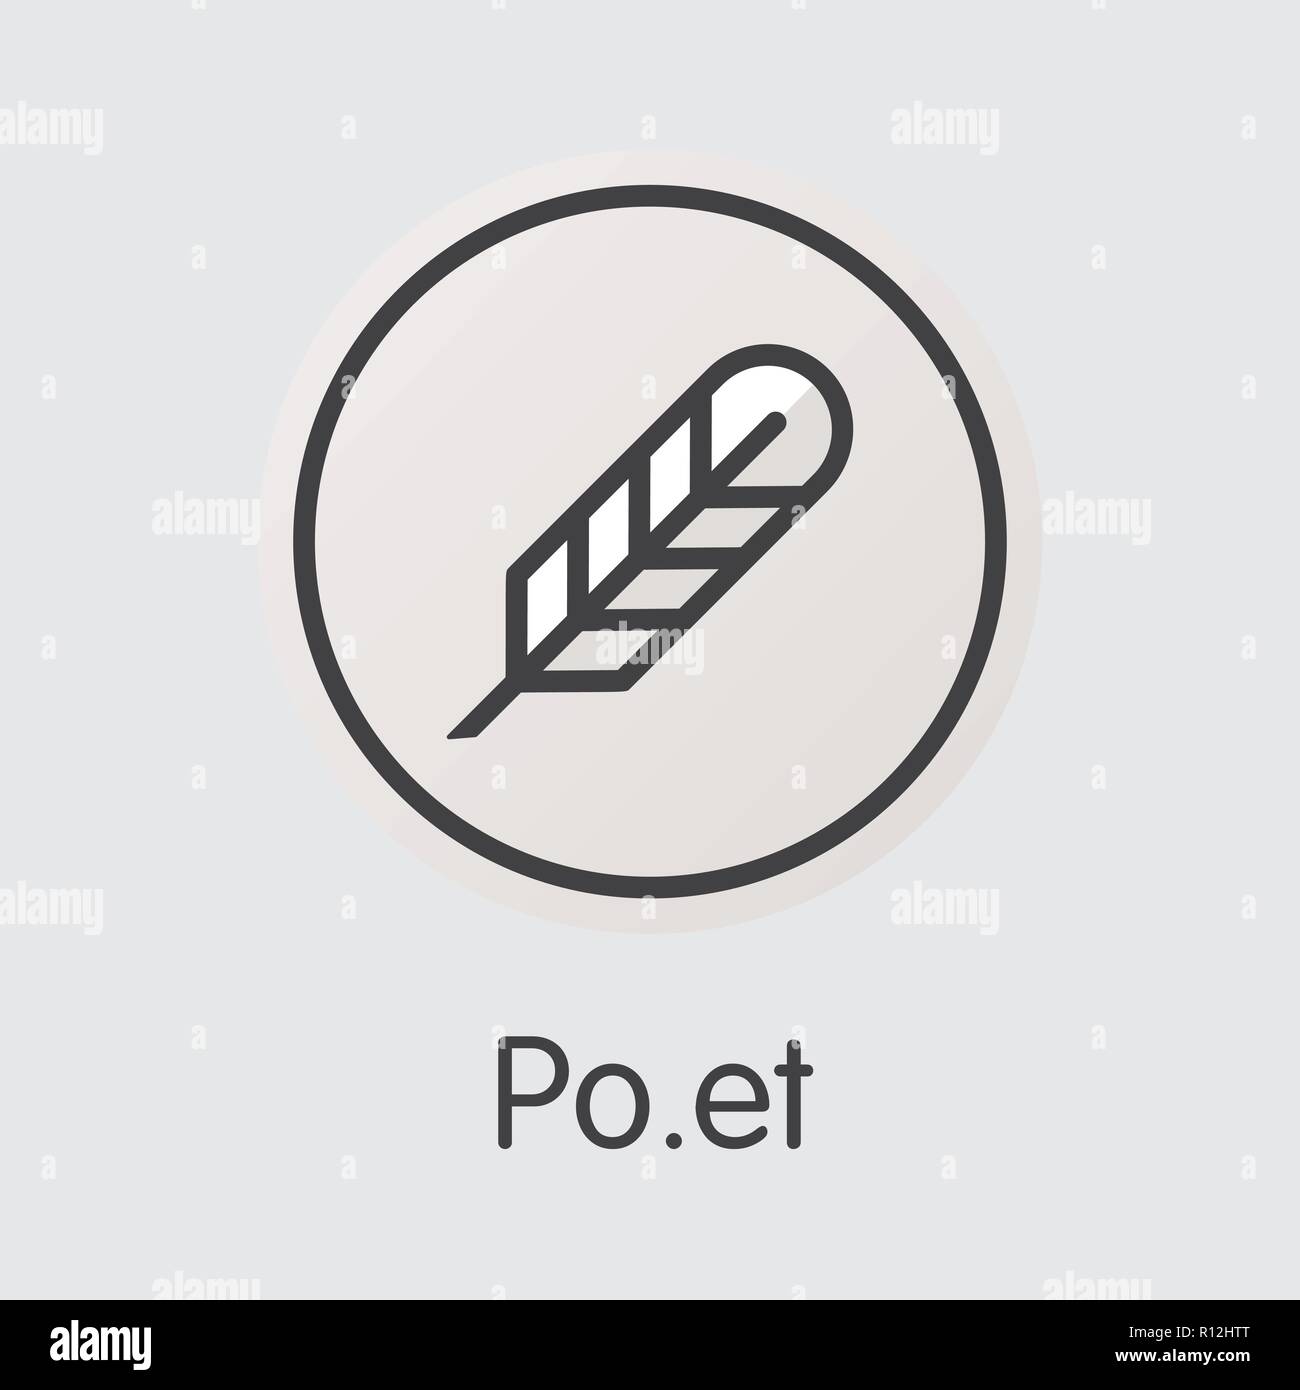 Poet Virtual Currency Coin. Vector Web Icon of POE. Stock Vector